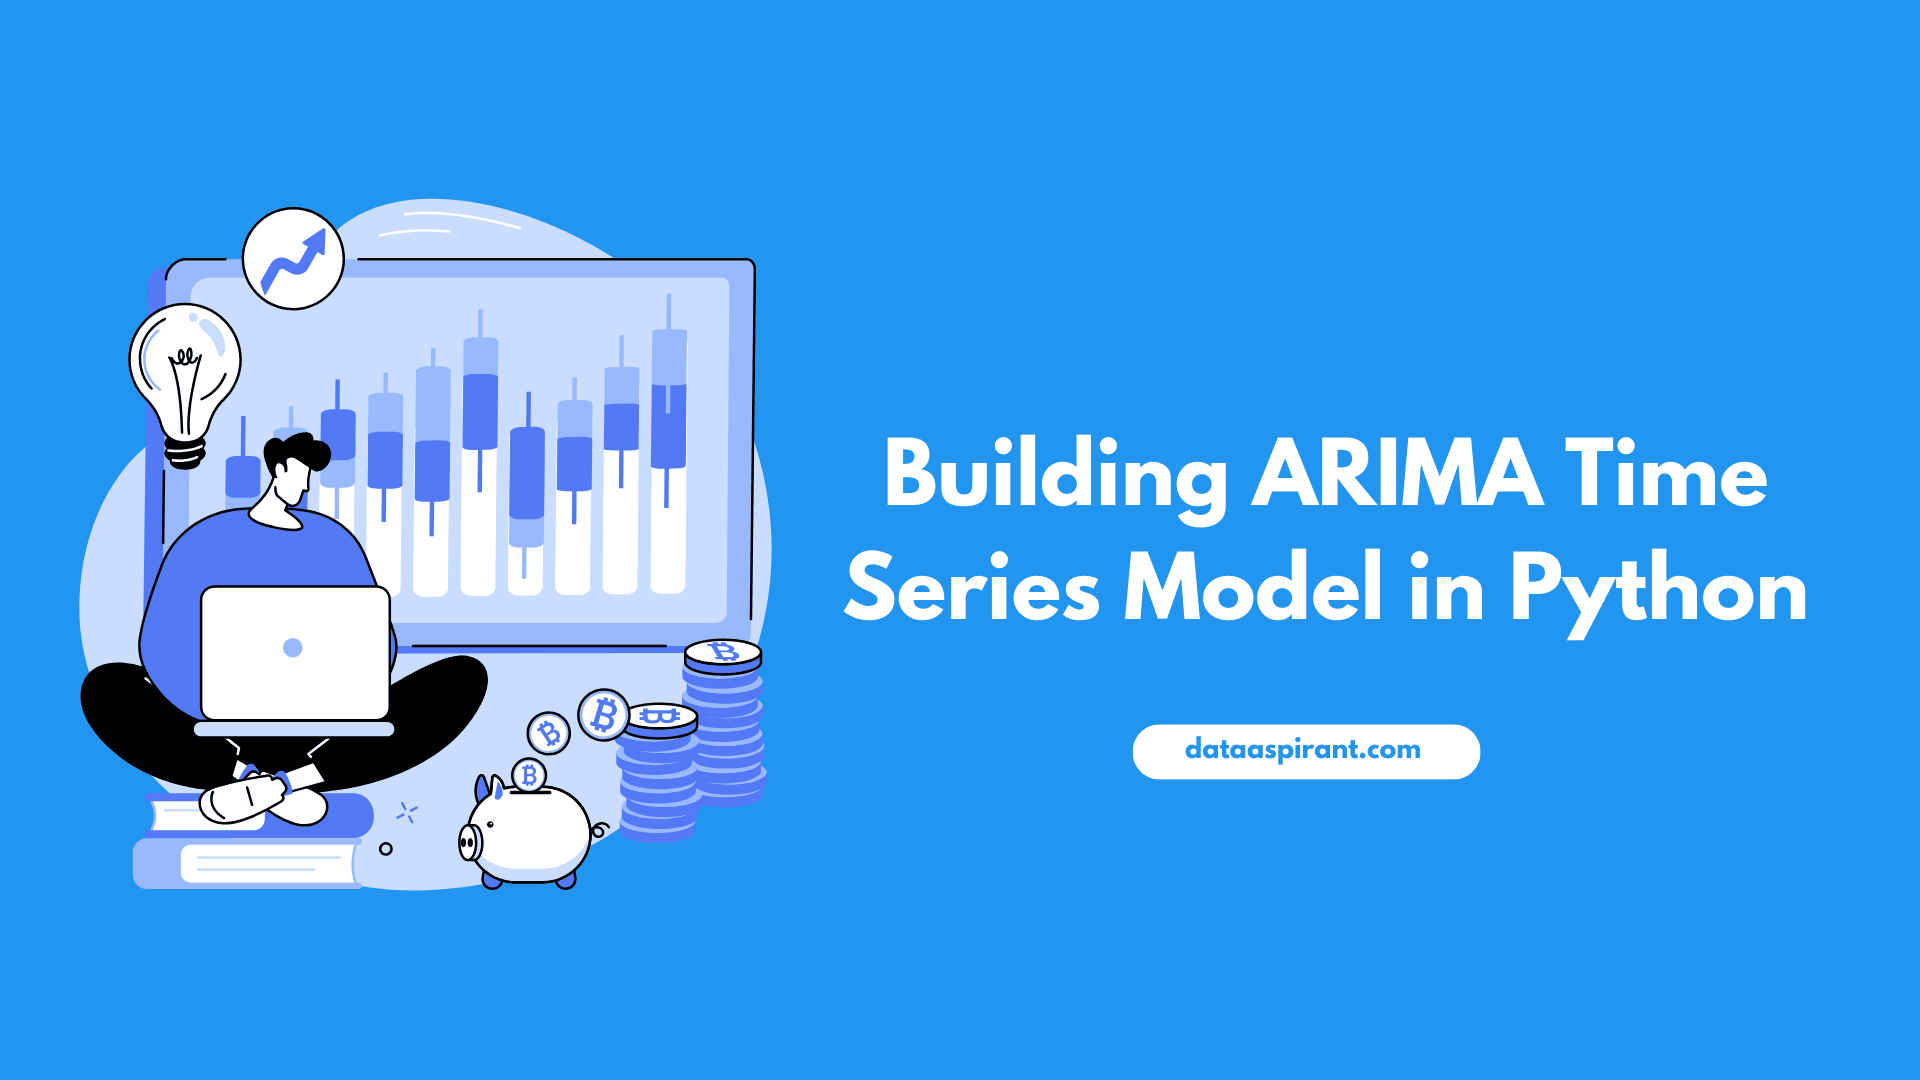 Building the ARIMA Time Series Model in Python